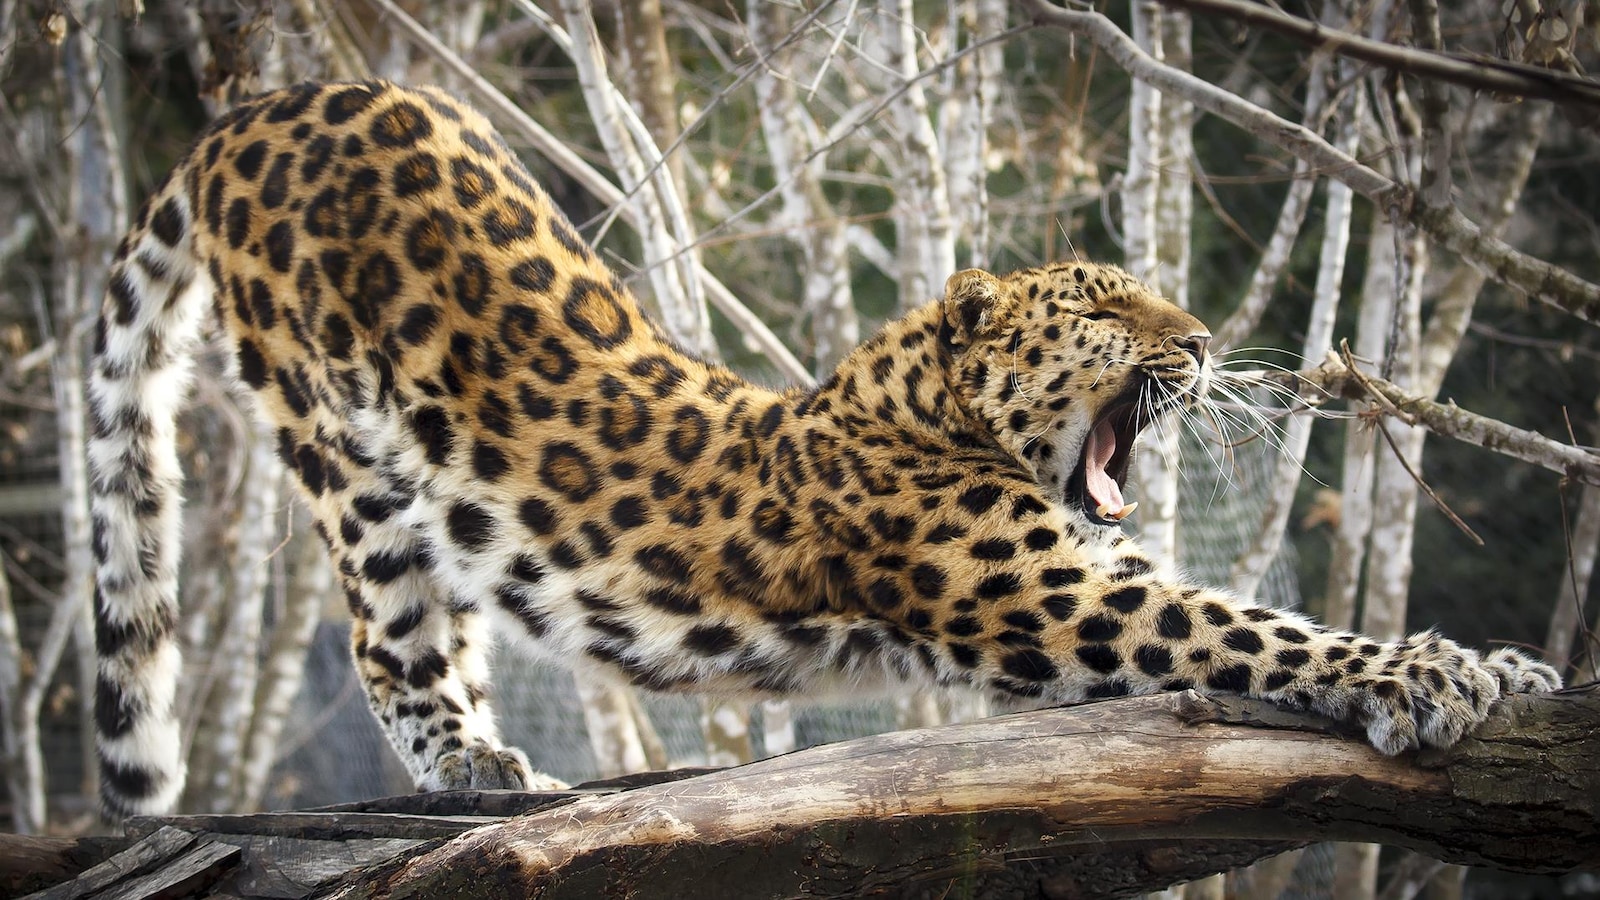 A leopard of love stretches through branches opening its mouth.